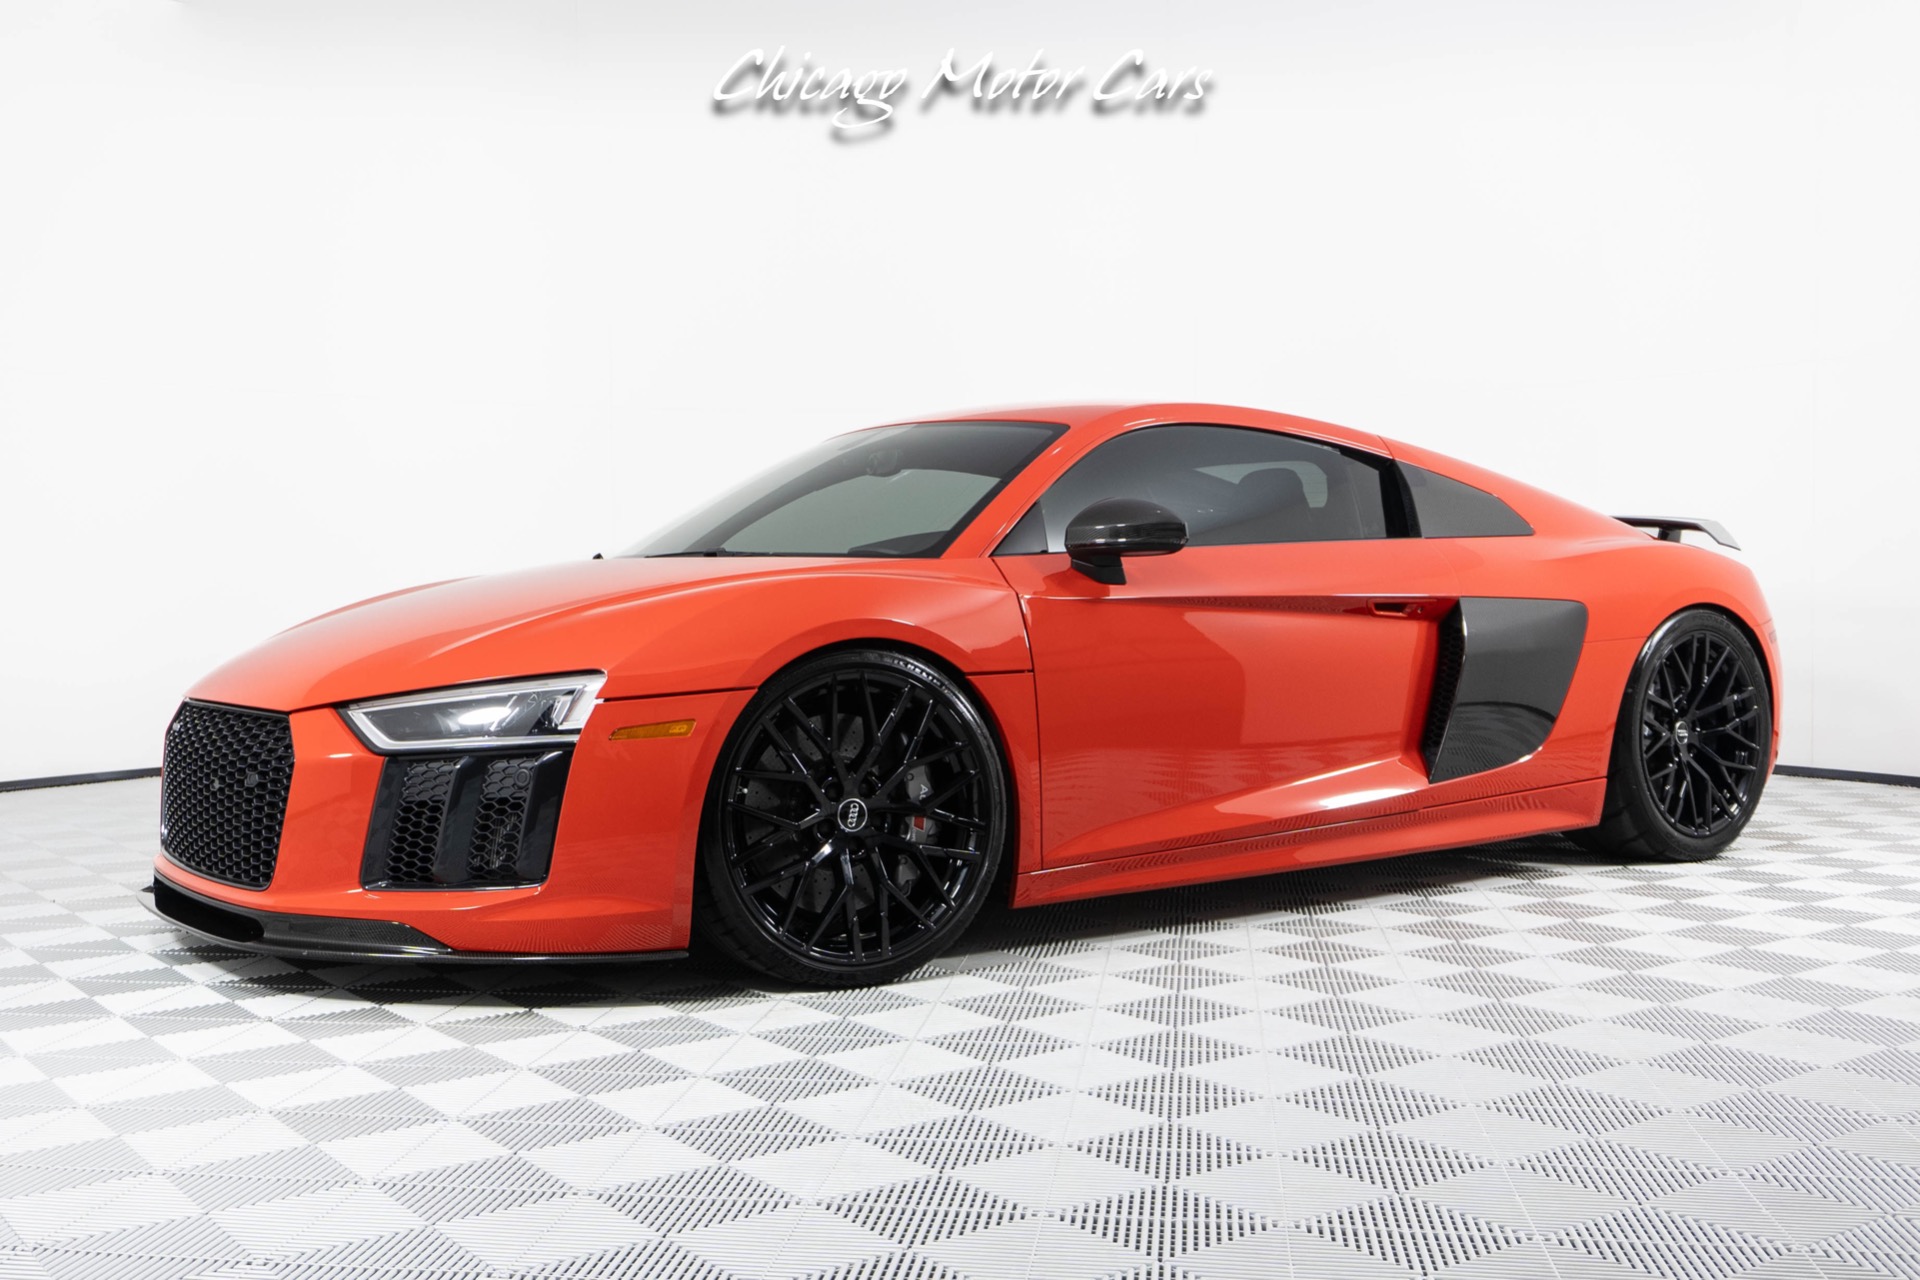 Used-2017-Audi-R8-Quattro-V10-Plus-AMS-Alpha-12-Twin-Turbo-Package-Built-Trans-Full-PPF-Loaded